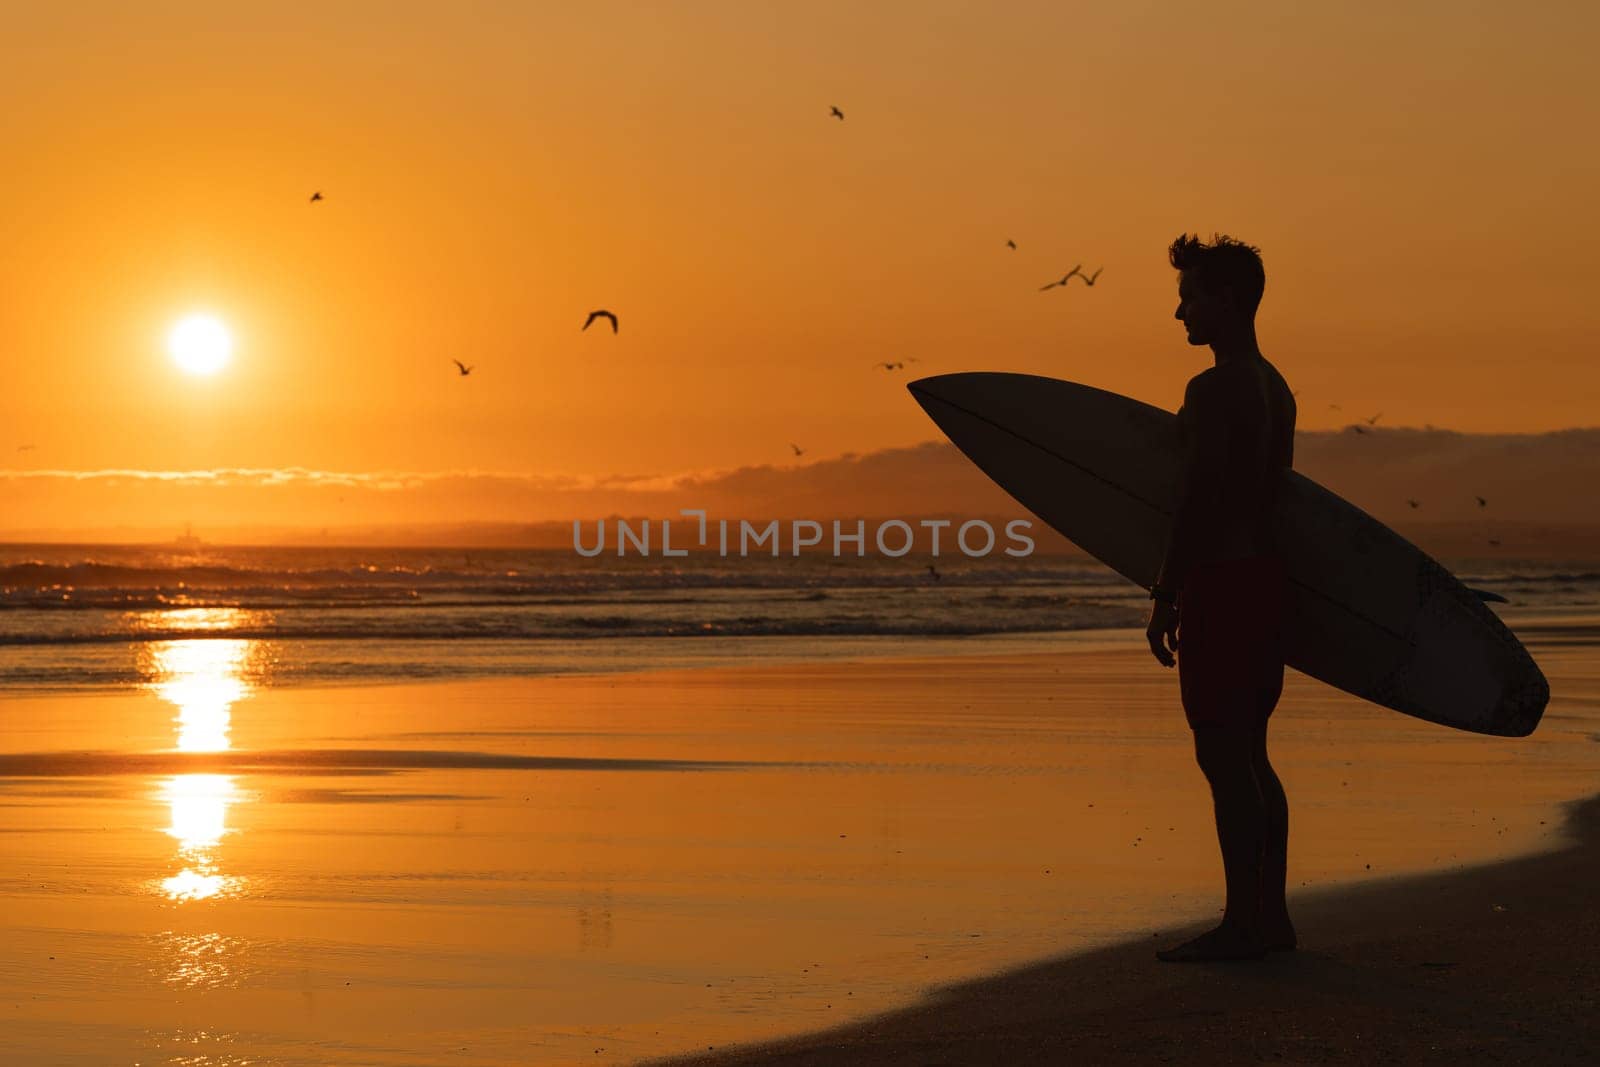 Black silhouette of an athletic man standing on the shore holding a surfboard at orange sunset. Mid shot